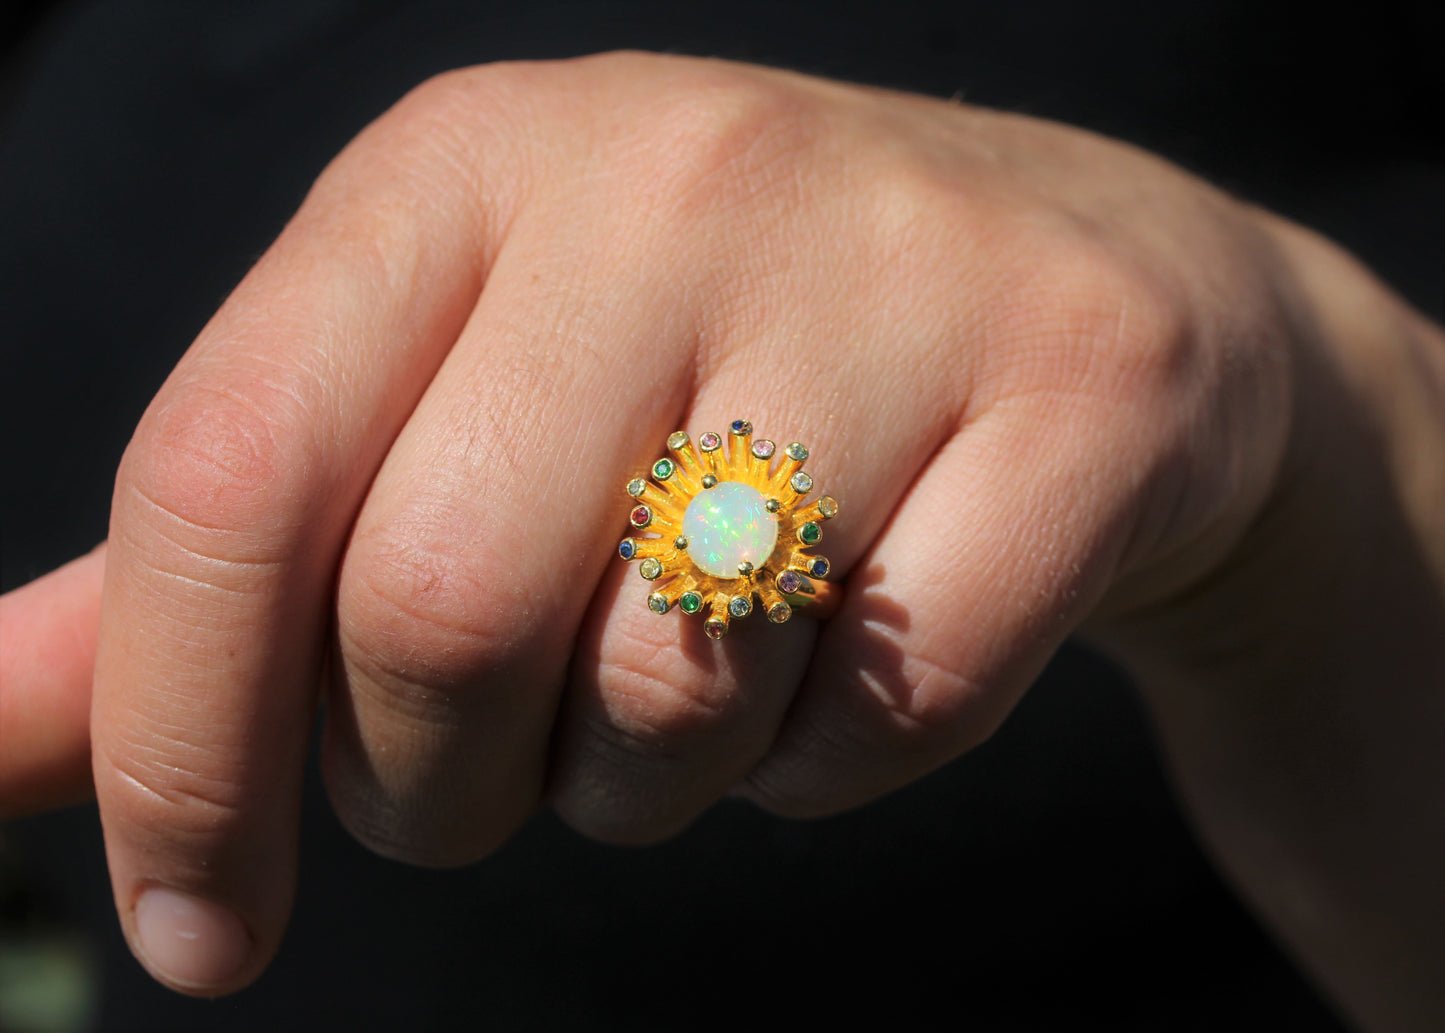 Opal Ring - 24k Gold Plated - Gemstone Accents - Adjustable Size #283